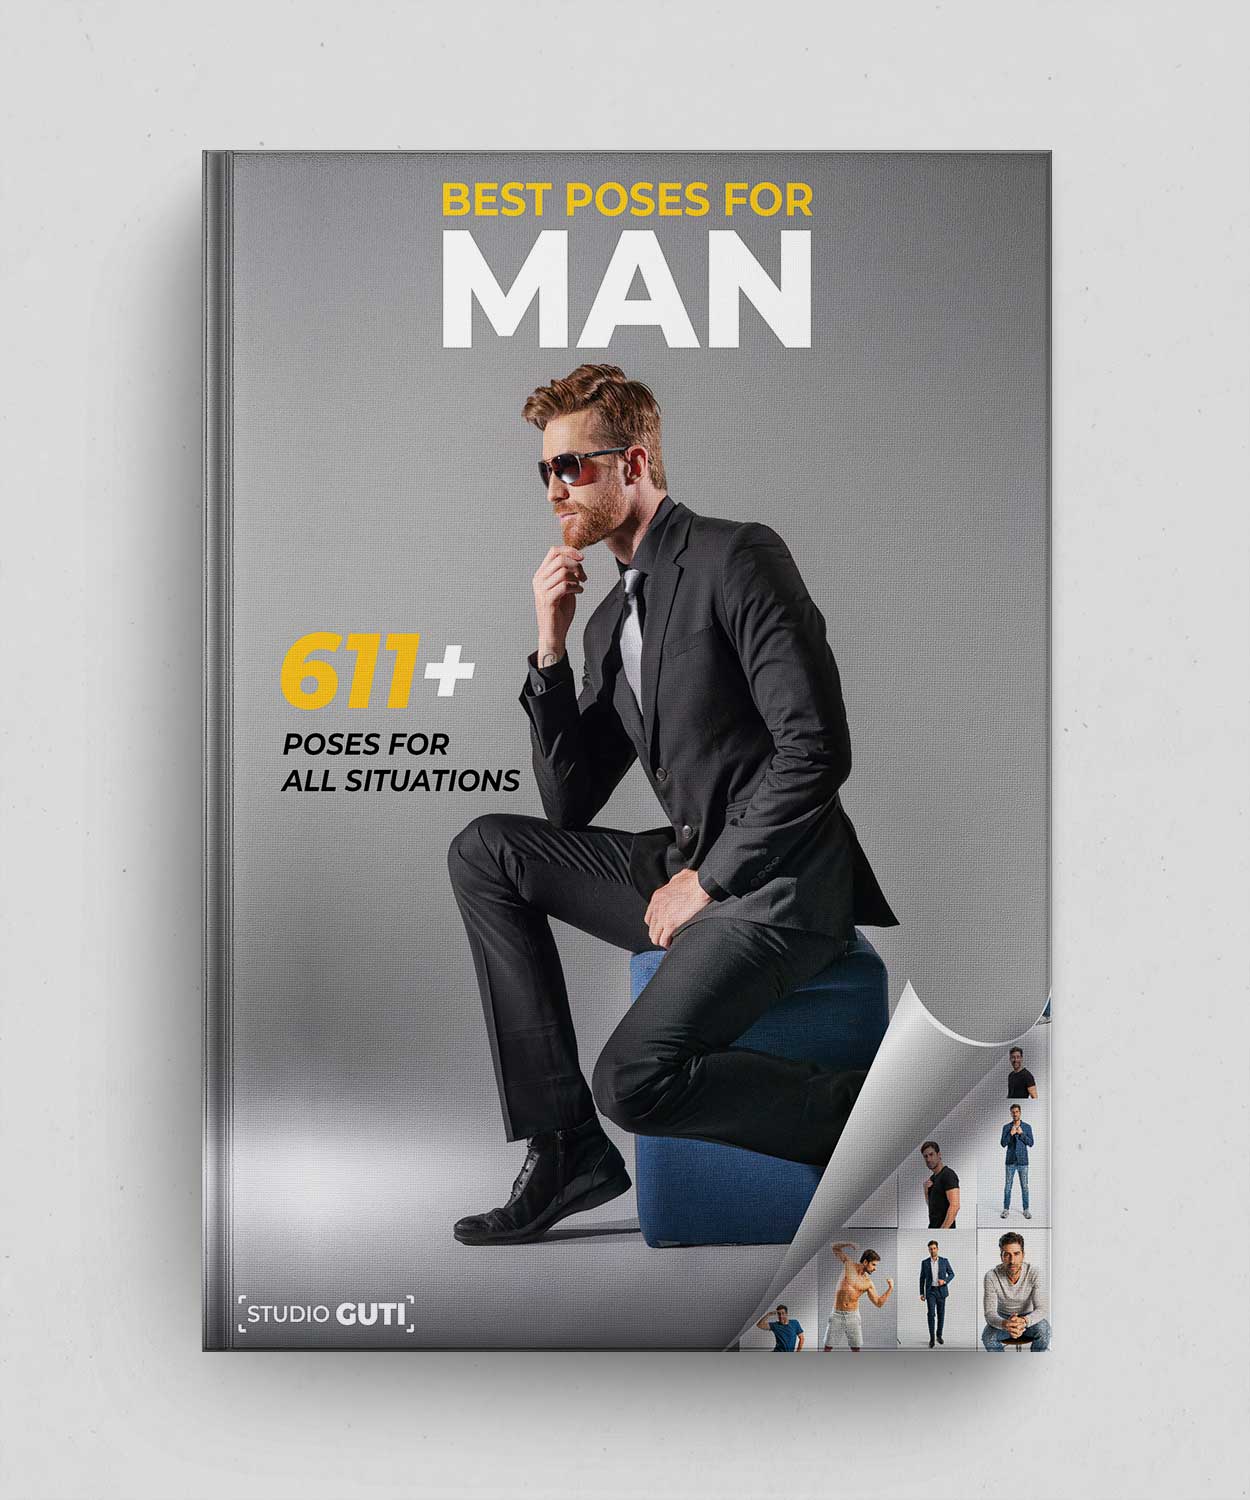 The Best 611 Poses for Man – Digital Book